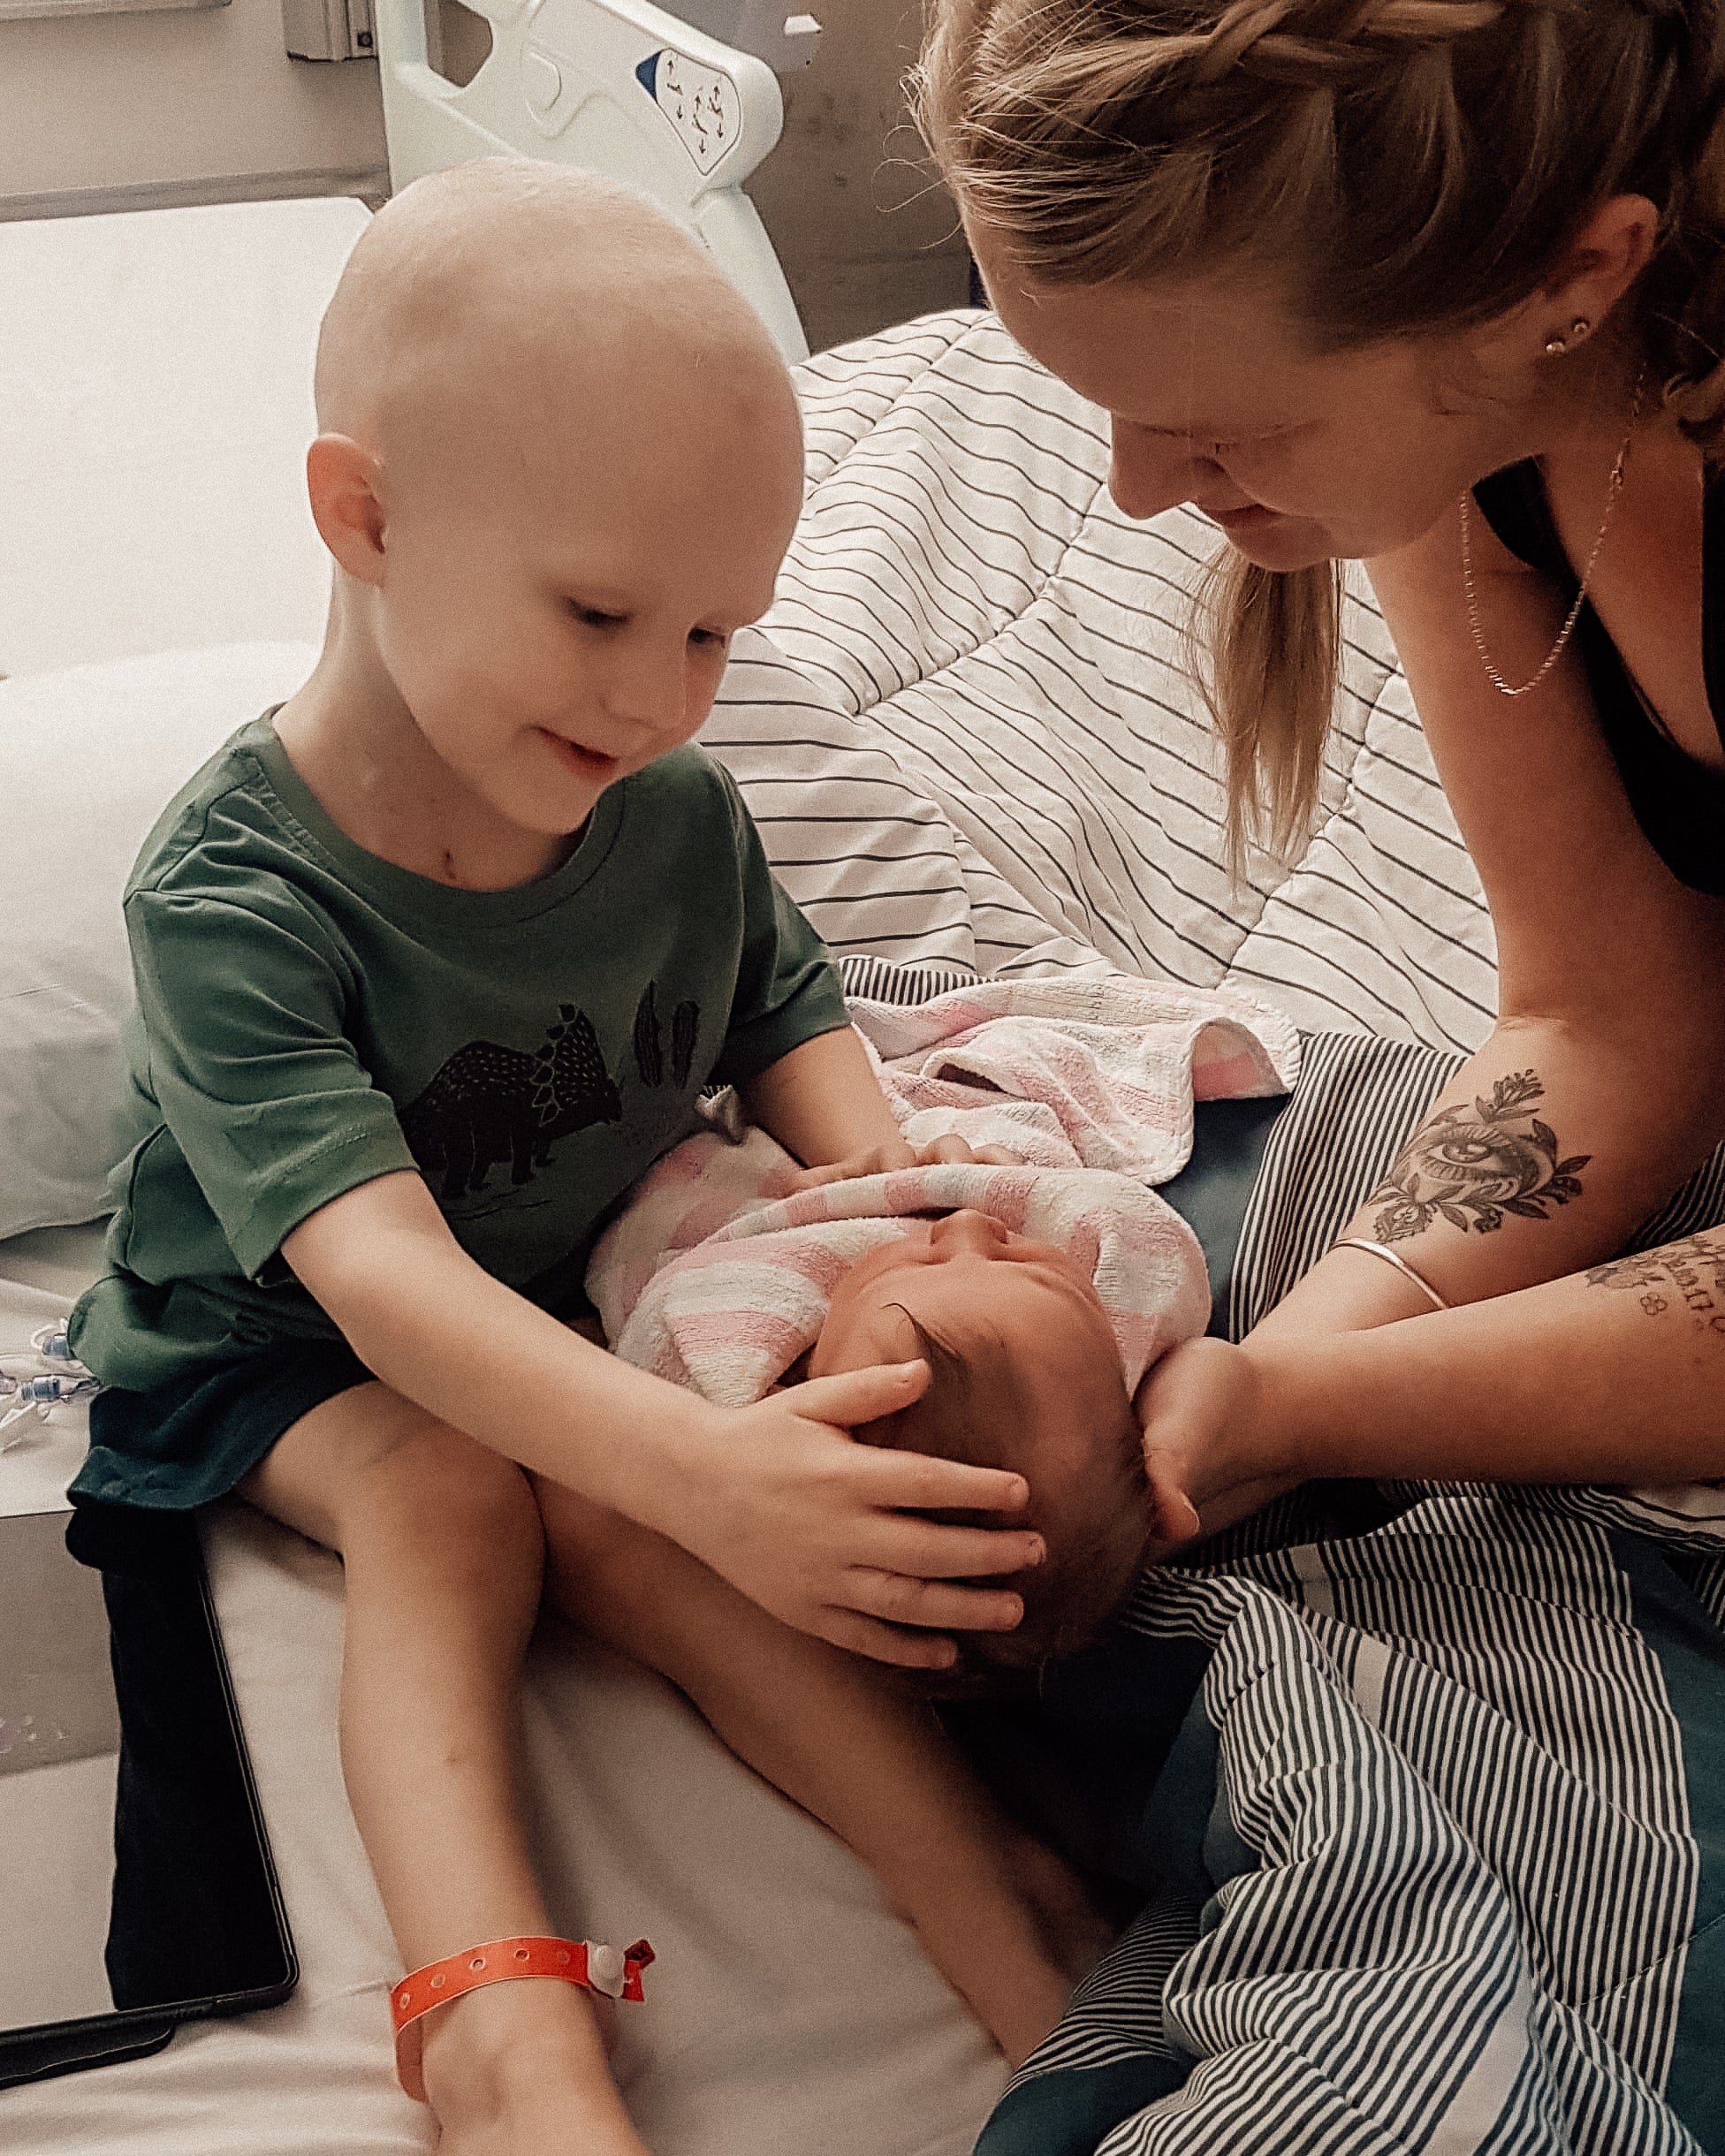 "When I was 22 weeks pregnant with my second... my 3-year-old was diagnosed with stage 5 cancer." 💔